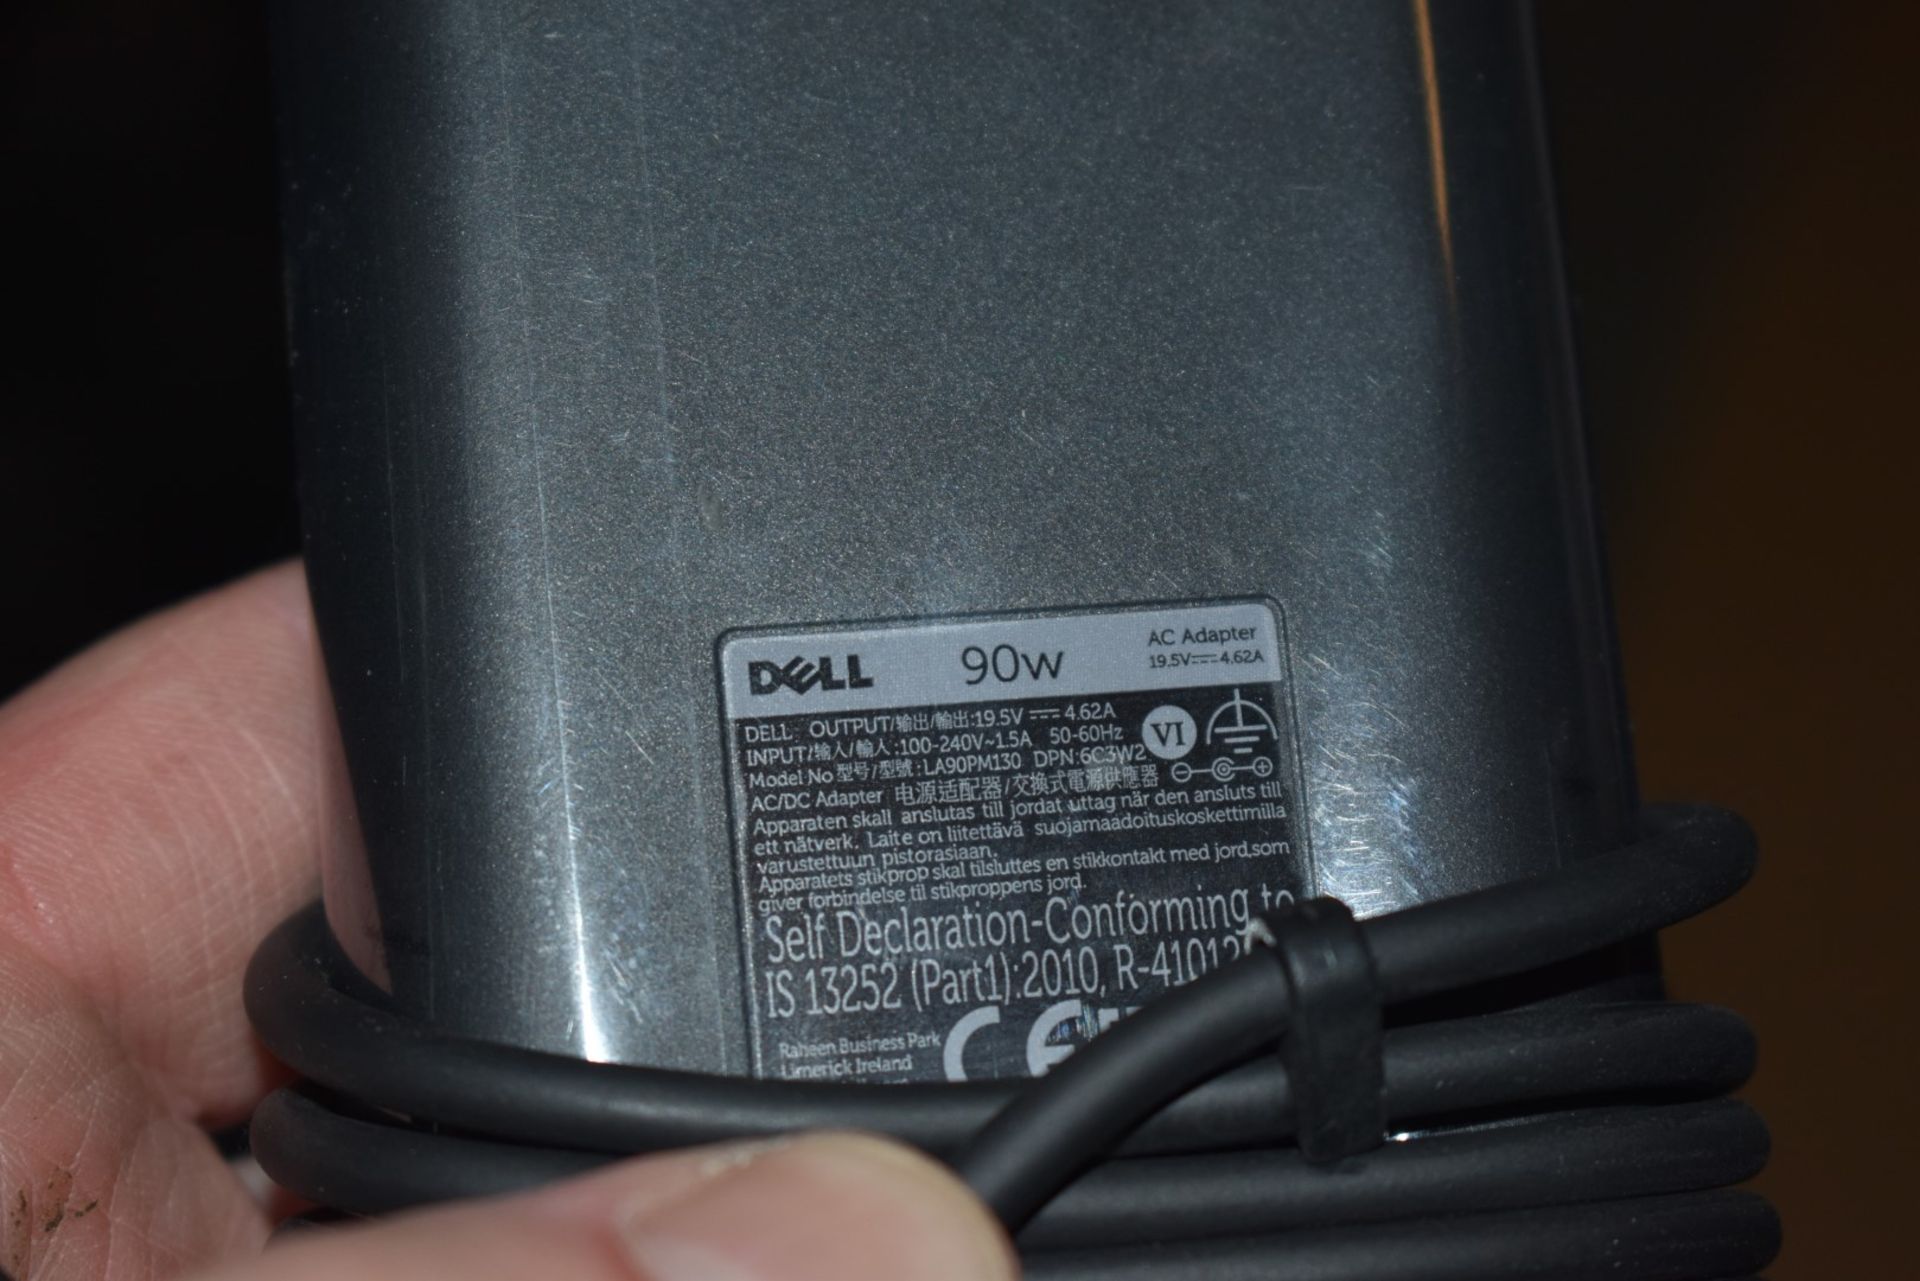 1 x Genuine Dell Laptop Charger Power Supply 90W Slim Design PN-06C3W2 - New and Boxed - Ref: IN2132 - Image 4 of 5